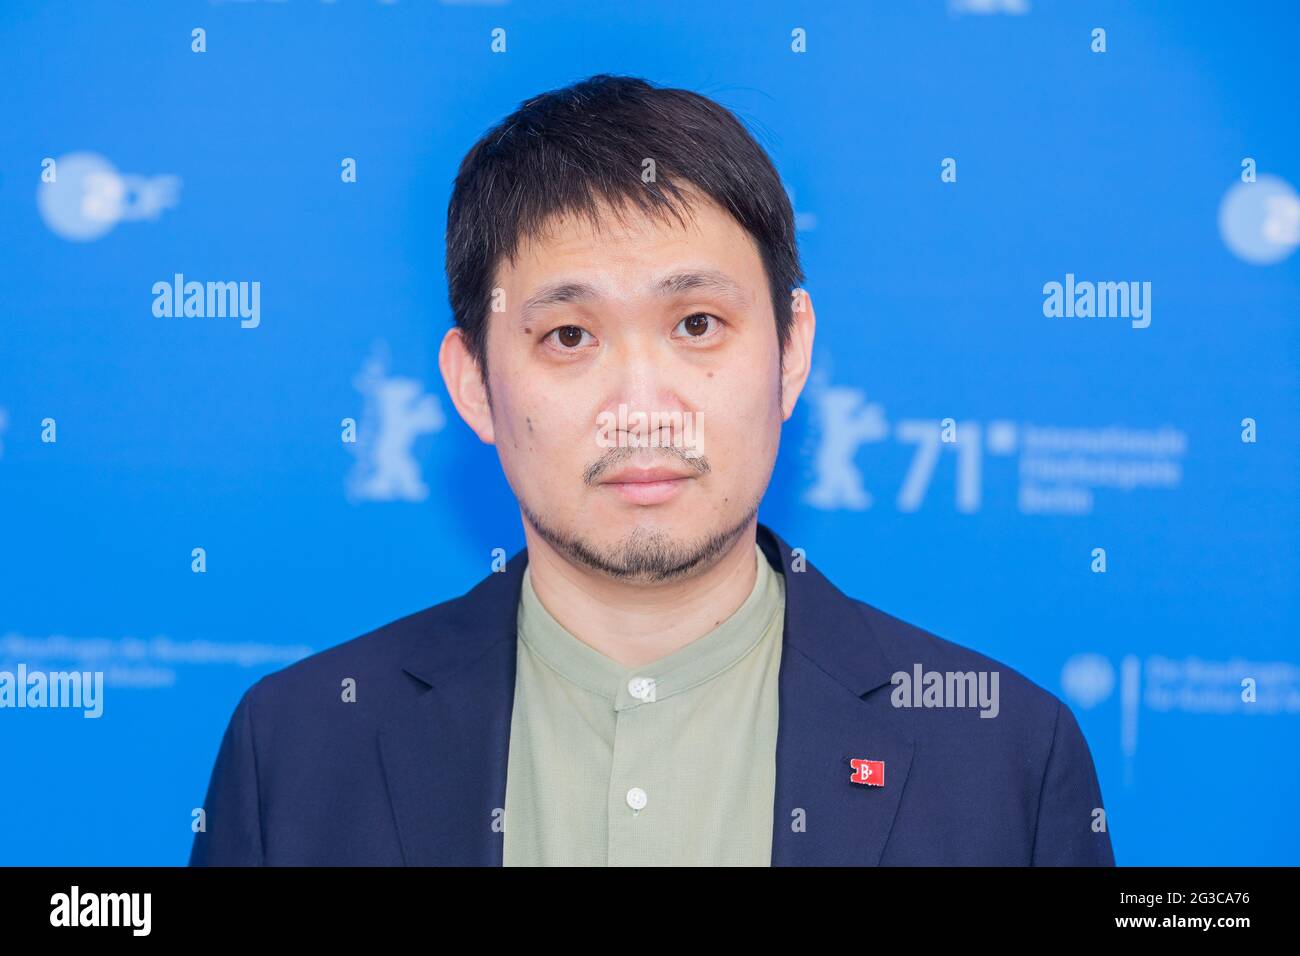 Berlin, Germany. 15th June, 2021. Ryusuke Hamaguchi, director, comes to the open-air cinema on Museum Island for the premiere of his film 'Guzen to sozo' (Wheel of Fortune and Fantasy). Credit: Christoph Soeder/dpa-Pool/dpa/Alamy Live News Stock Photo